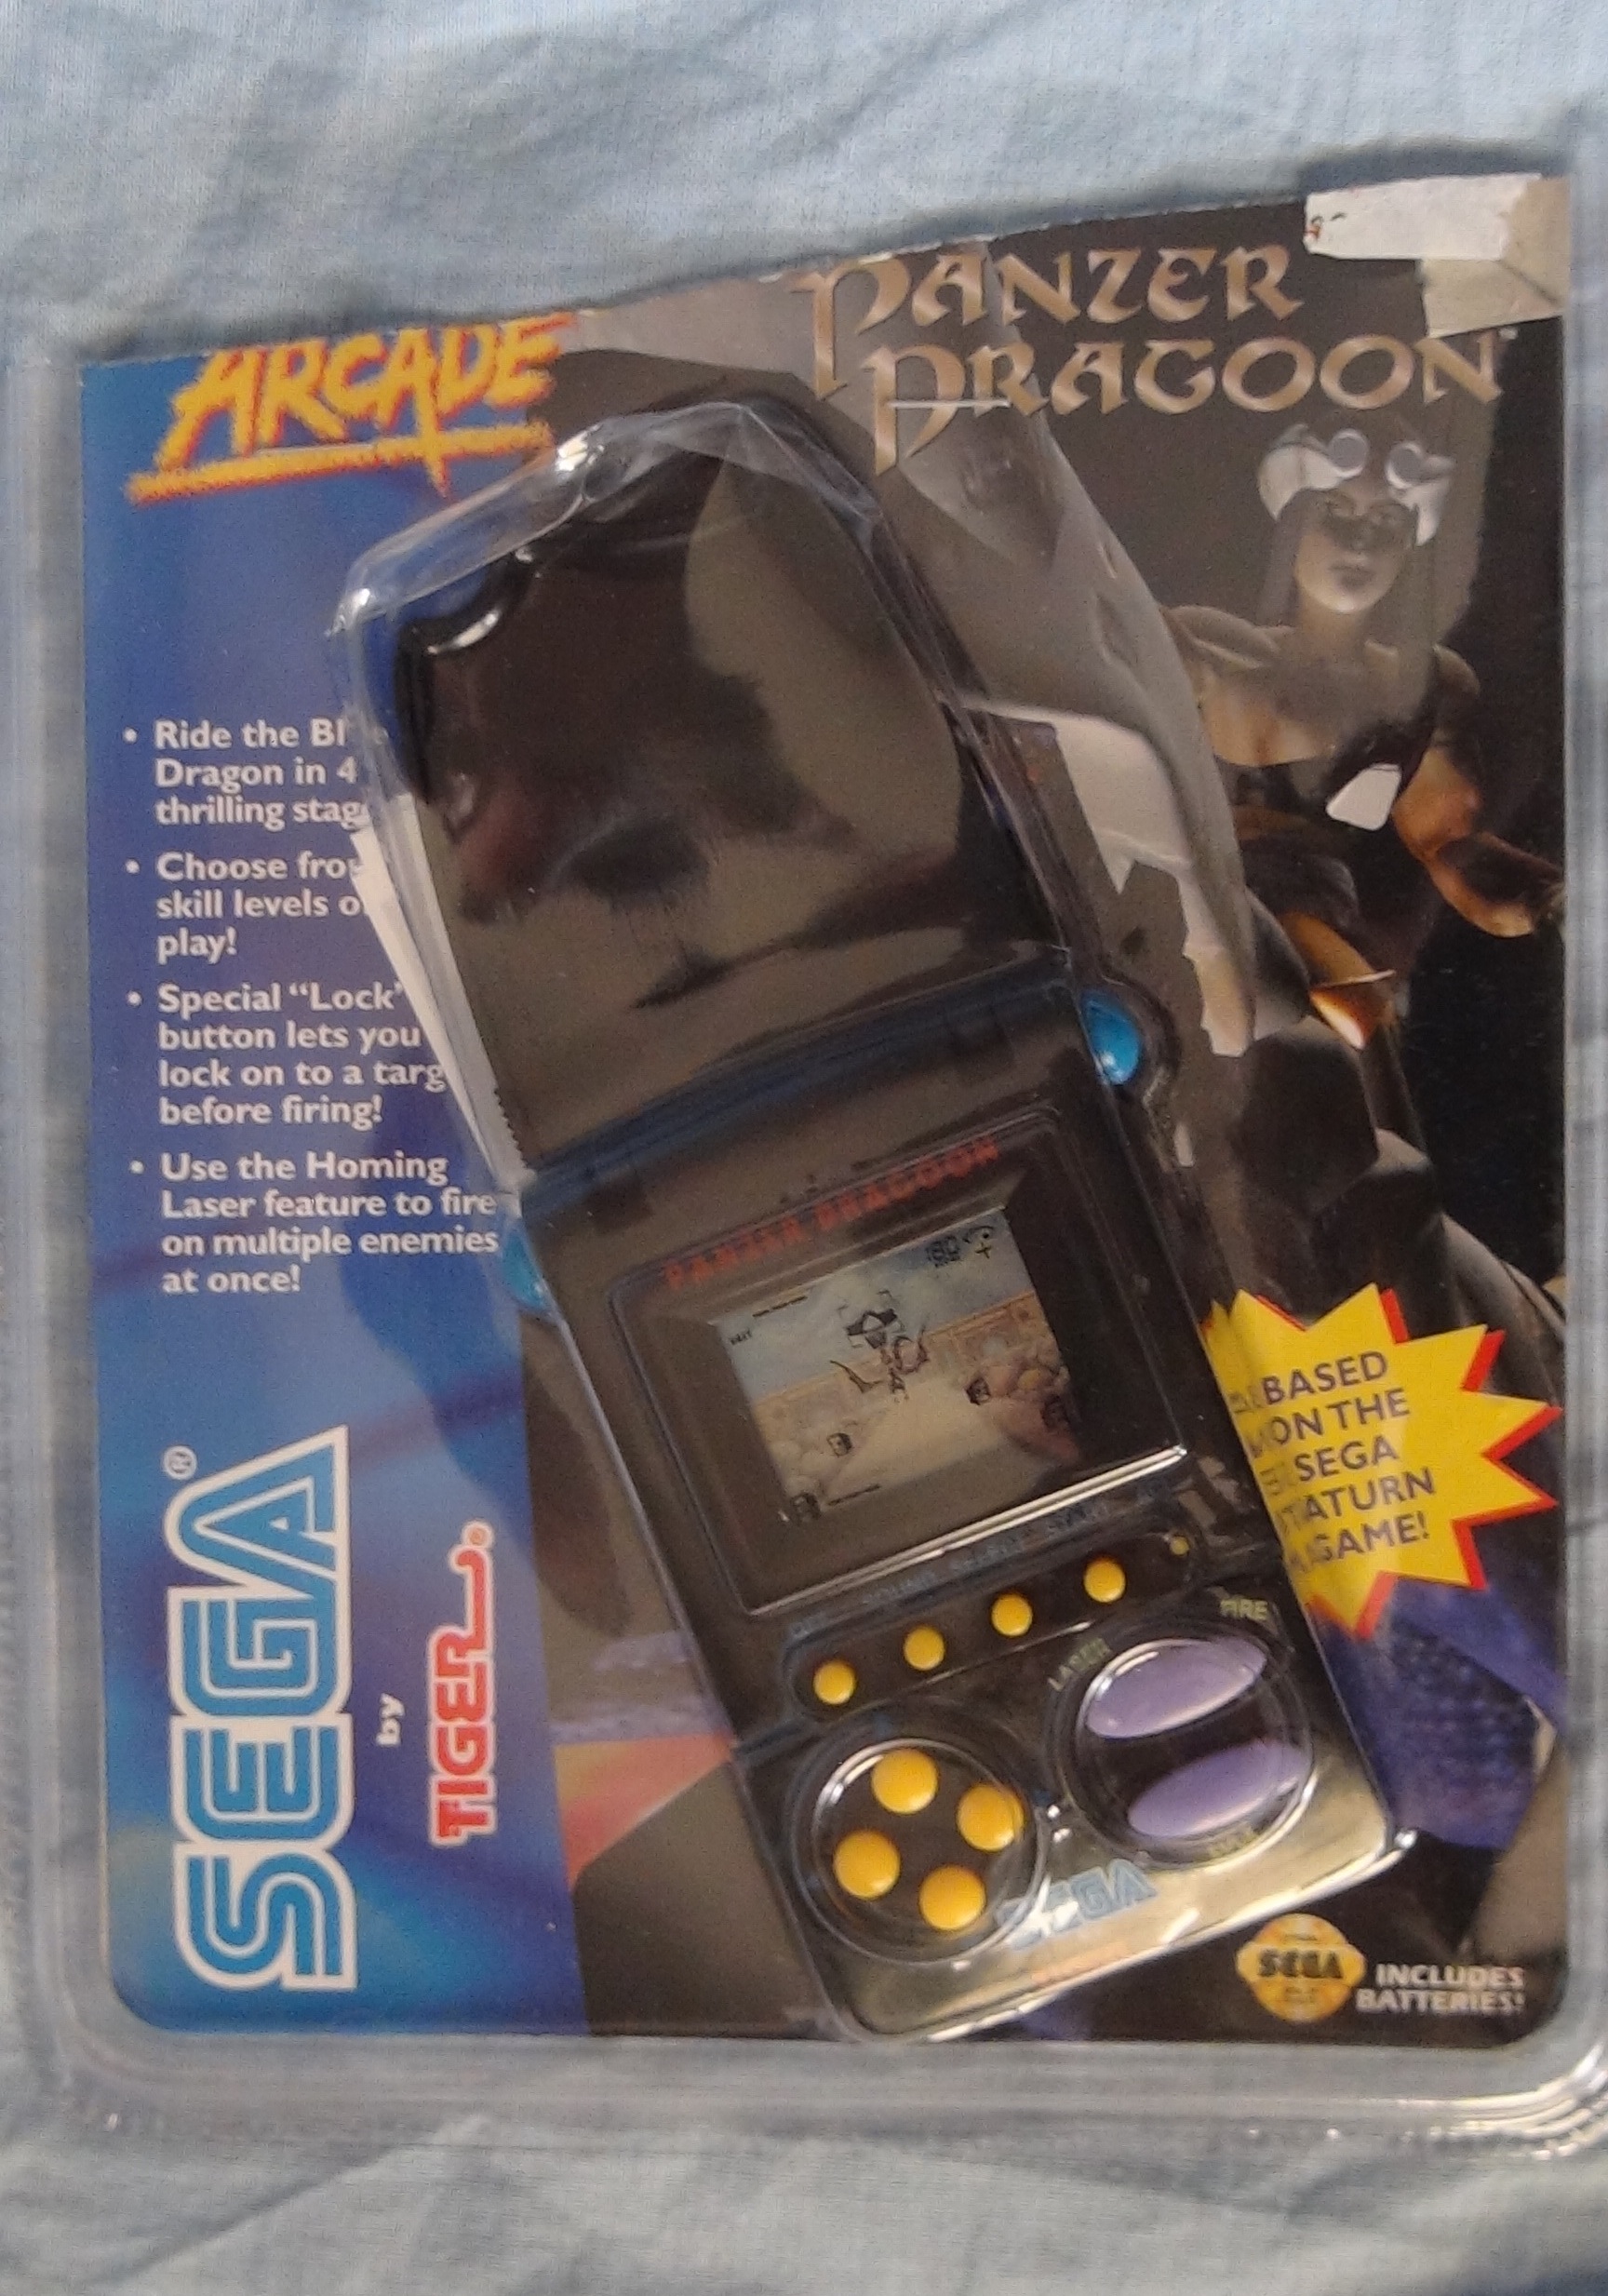 Panzer Dragoon (Tiger Electronics) Product Pictures